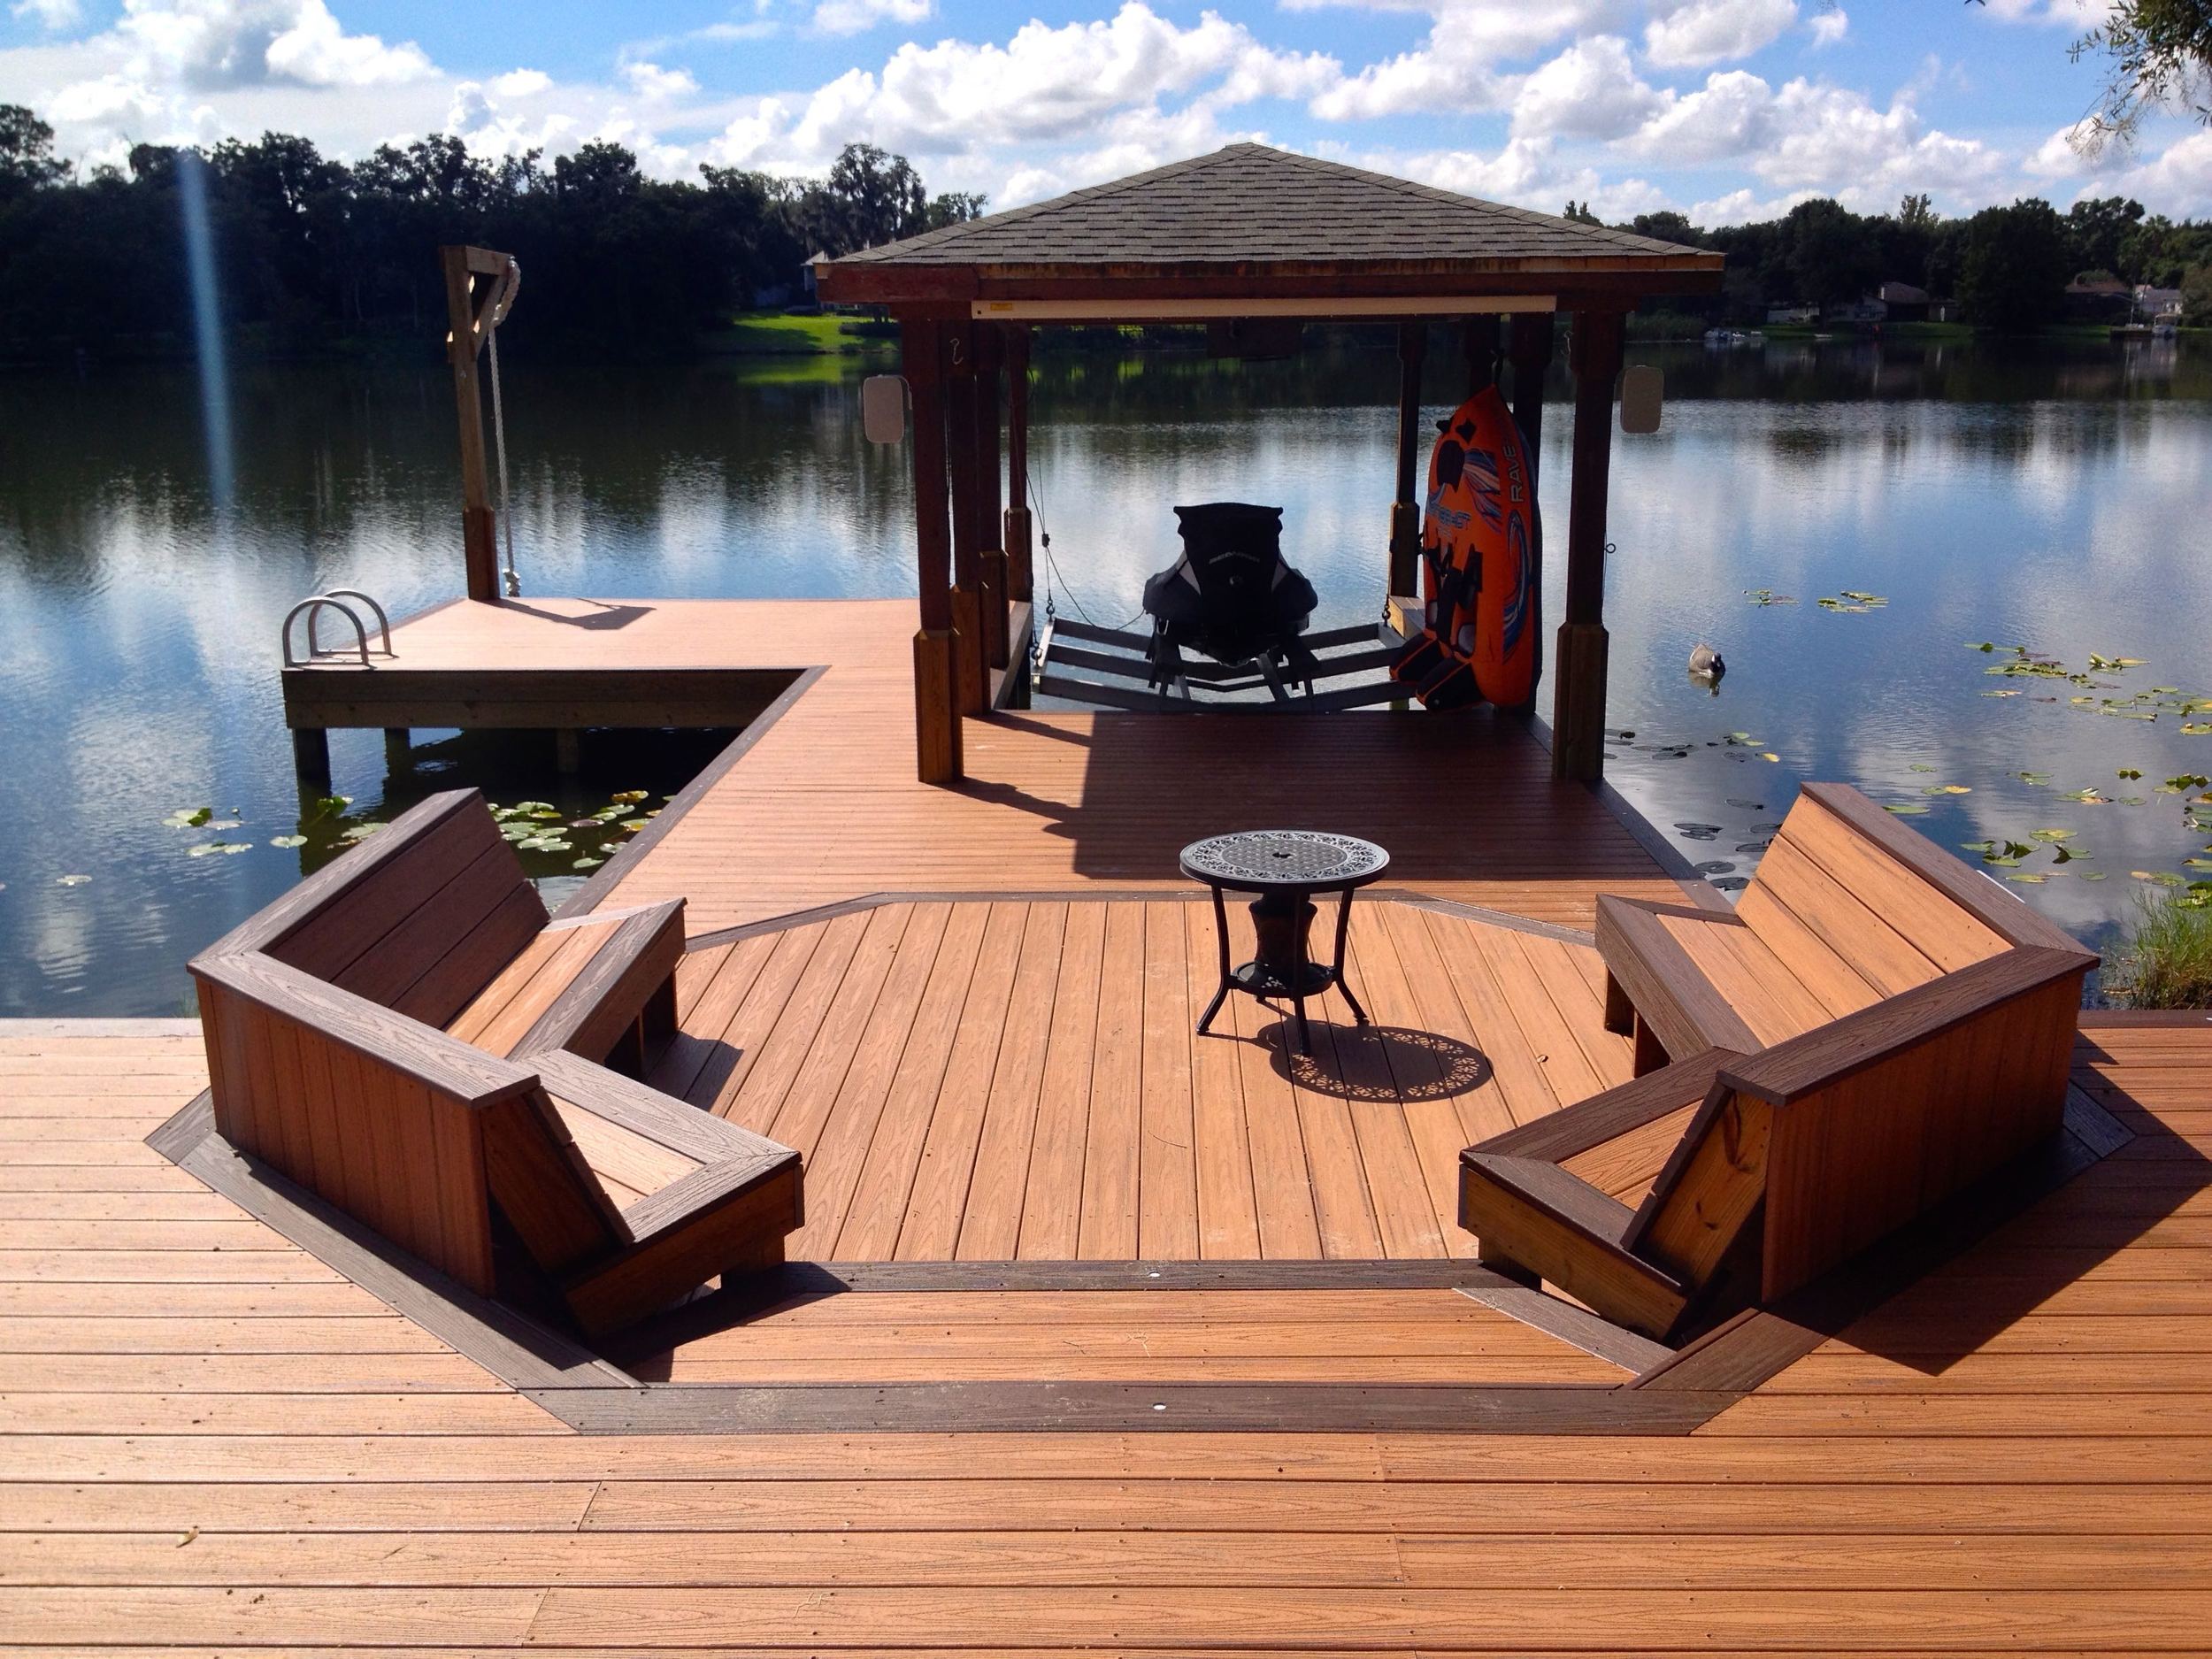 Gallery — Summertime Deck and Dock